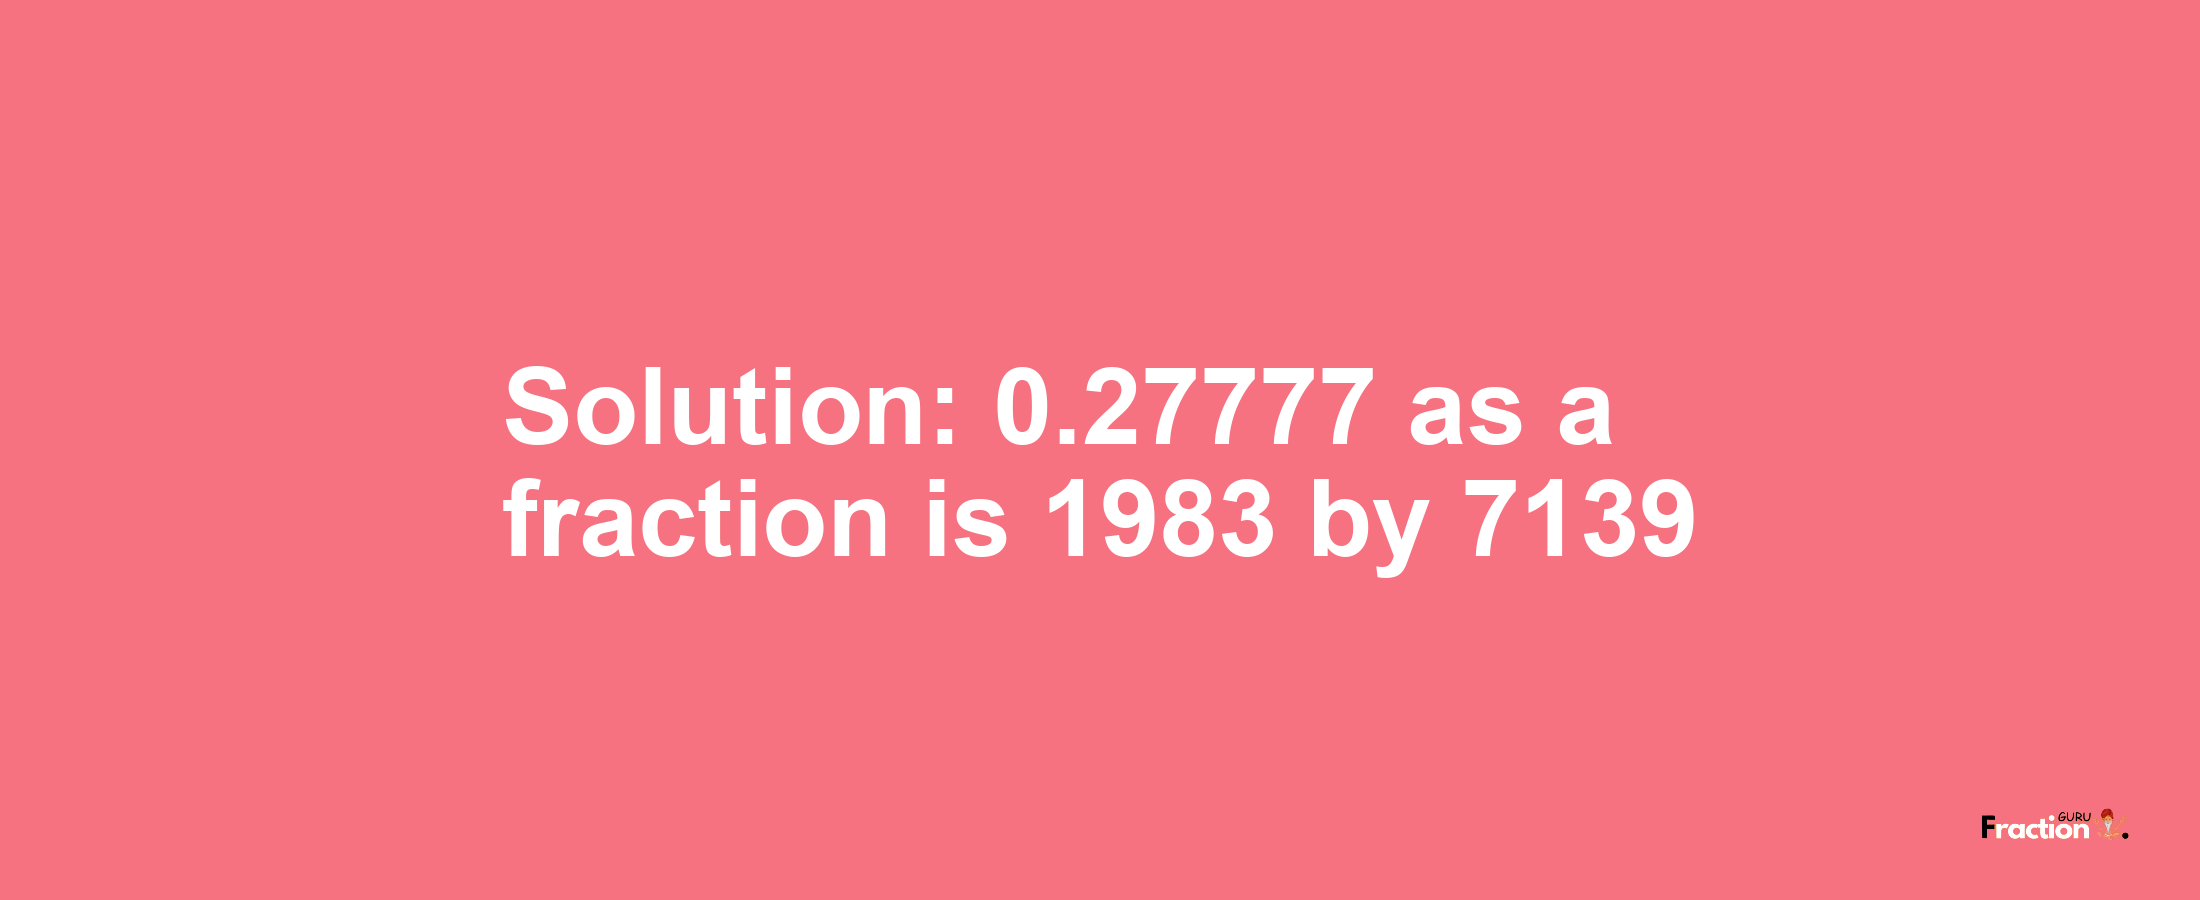 Solution:0.27777 as a fraction is 1983/7139